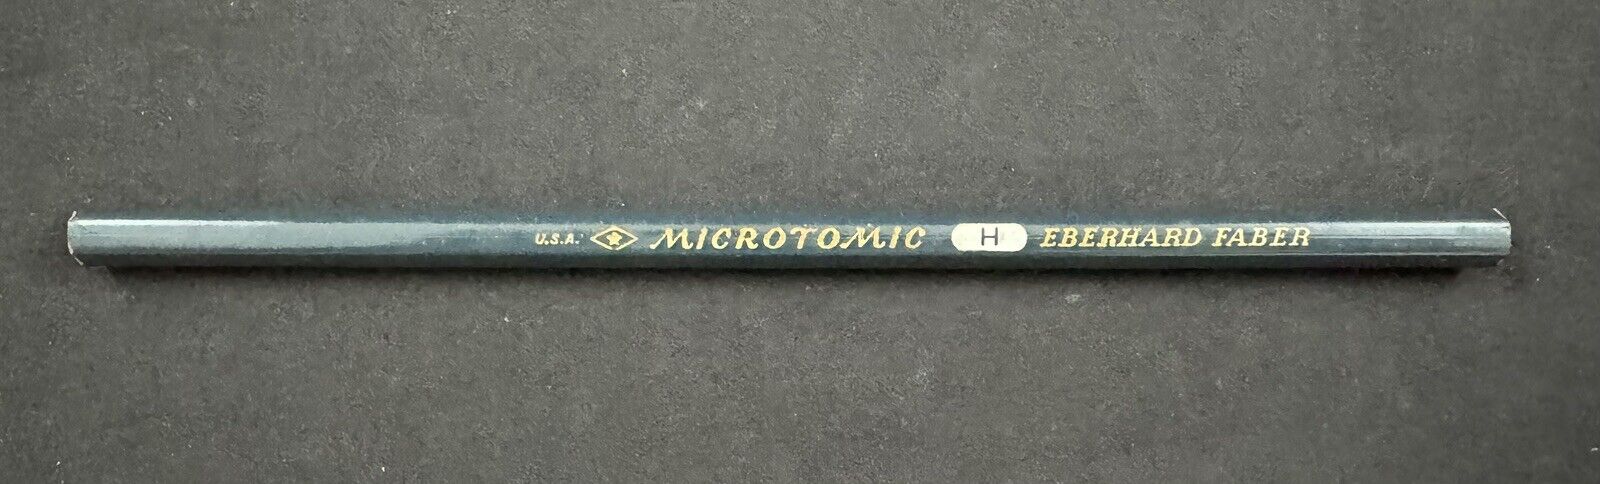 Vintage Eberhard Faber Microtomic H Pencil - Made in USA